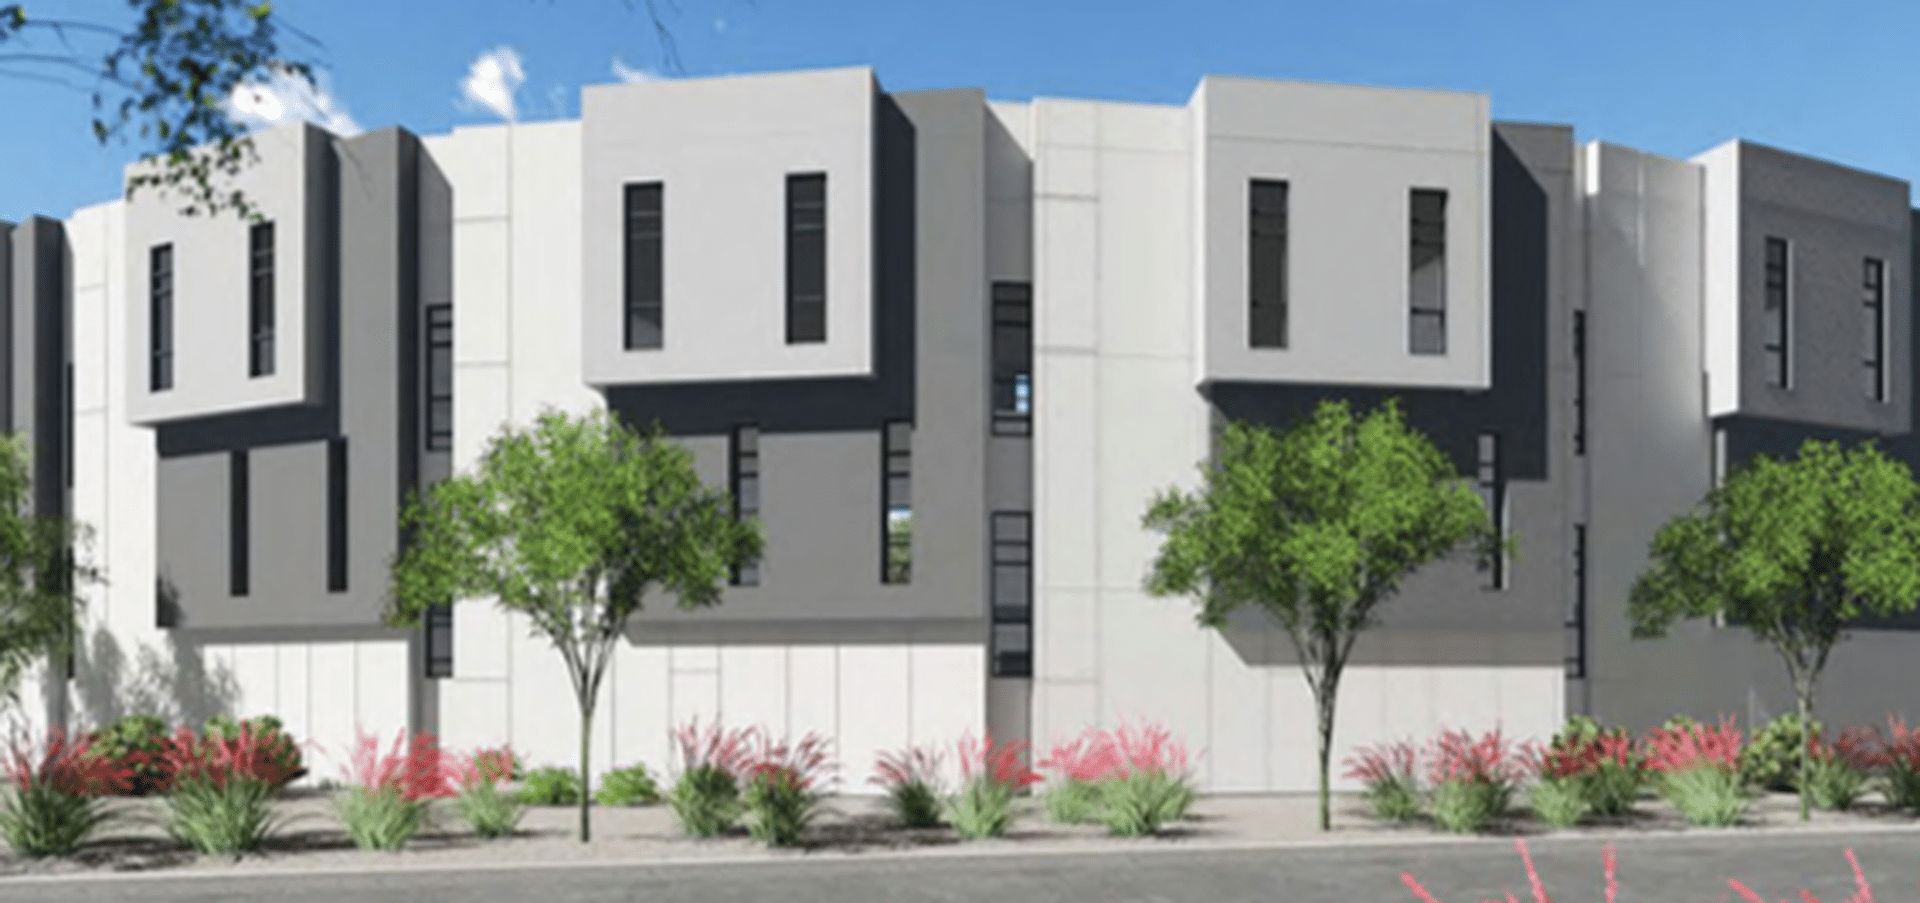 A rendering of the exterior of Eclipse Townhomes in Scottsdale